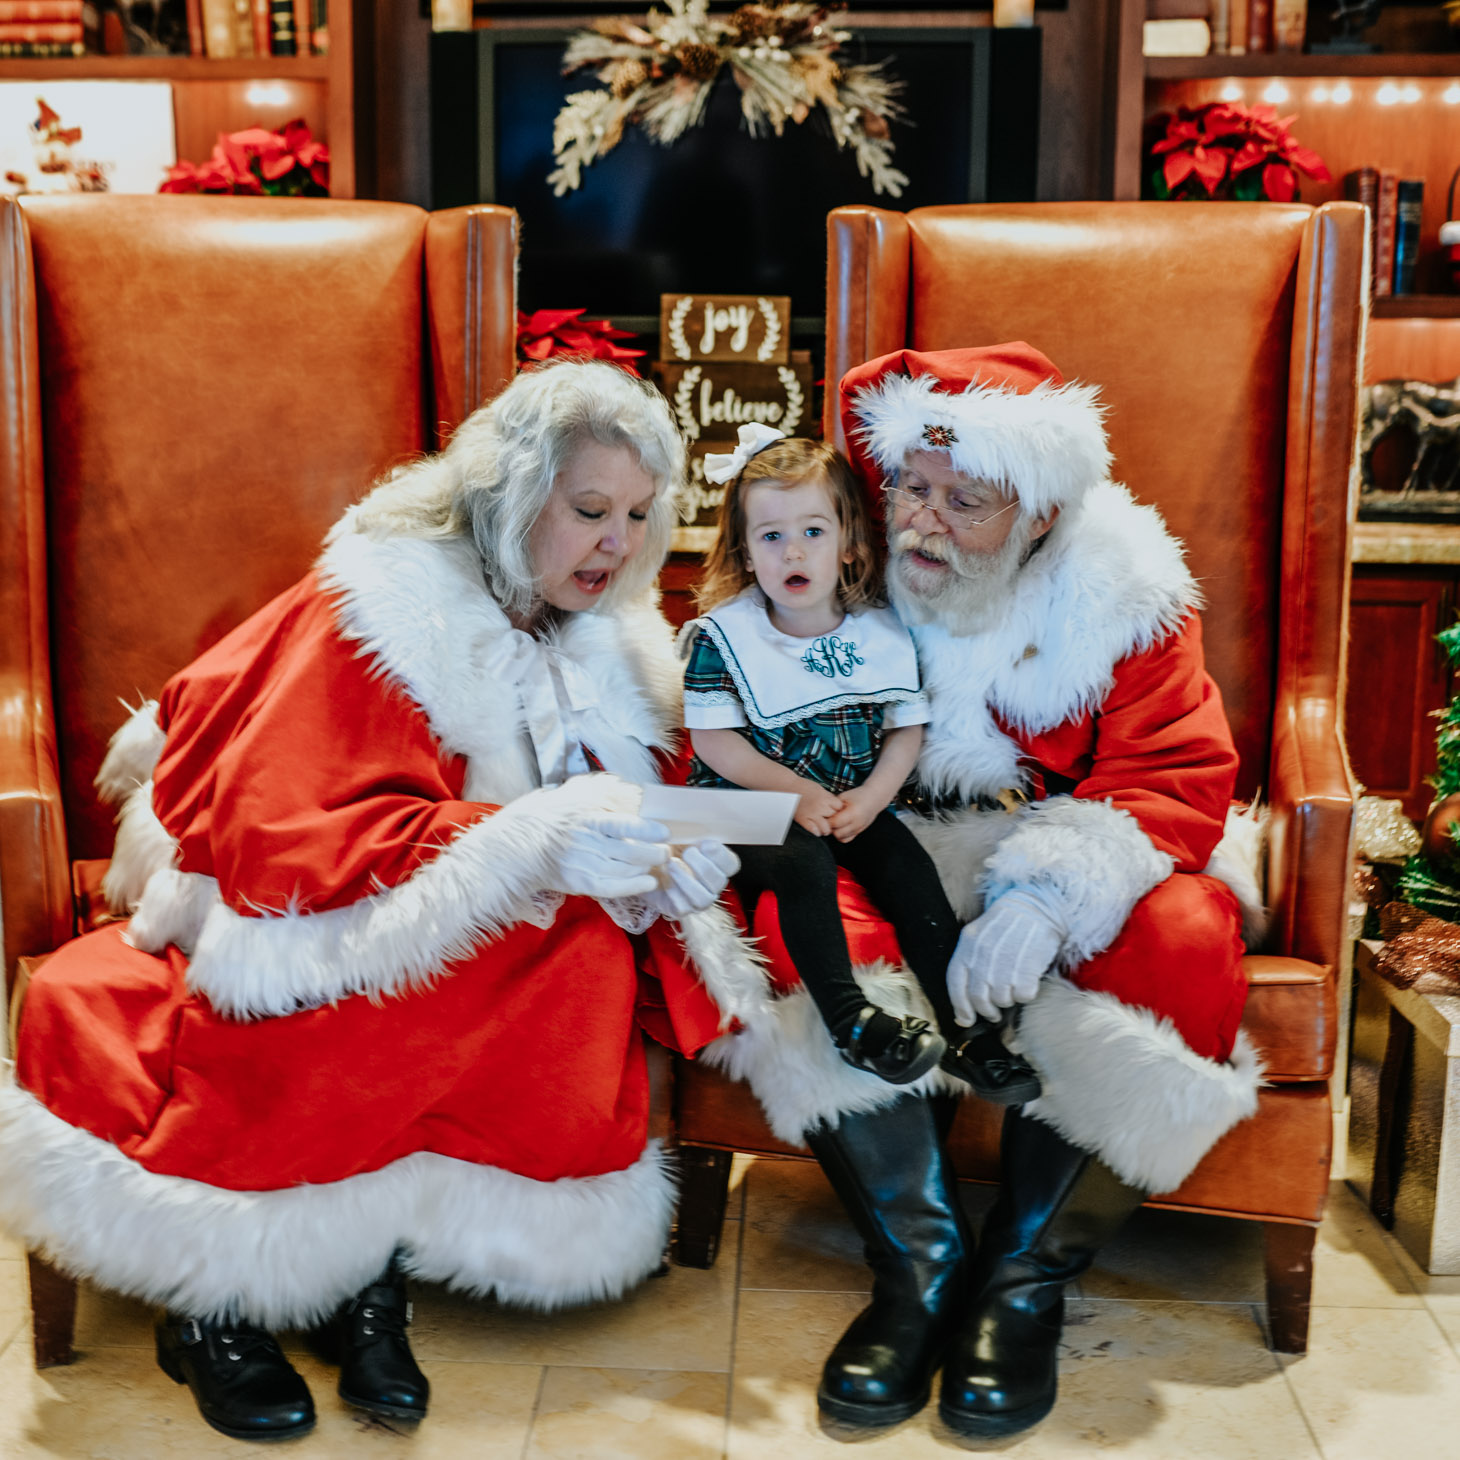 San Antonio in Winter featured by top US travel blog Lone Star Looking Glass; Image of child with Santa Claus and Mrs Claus